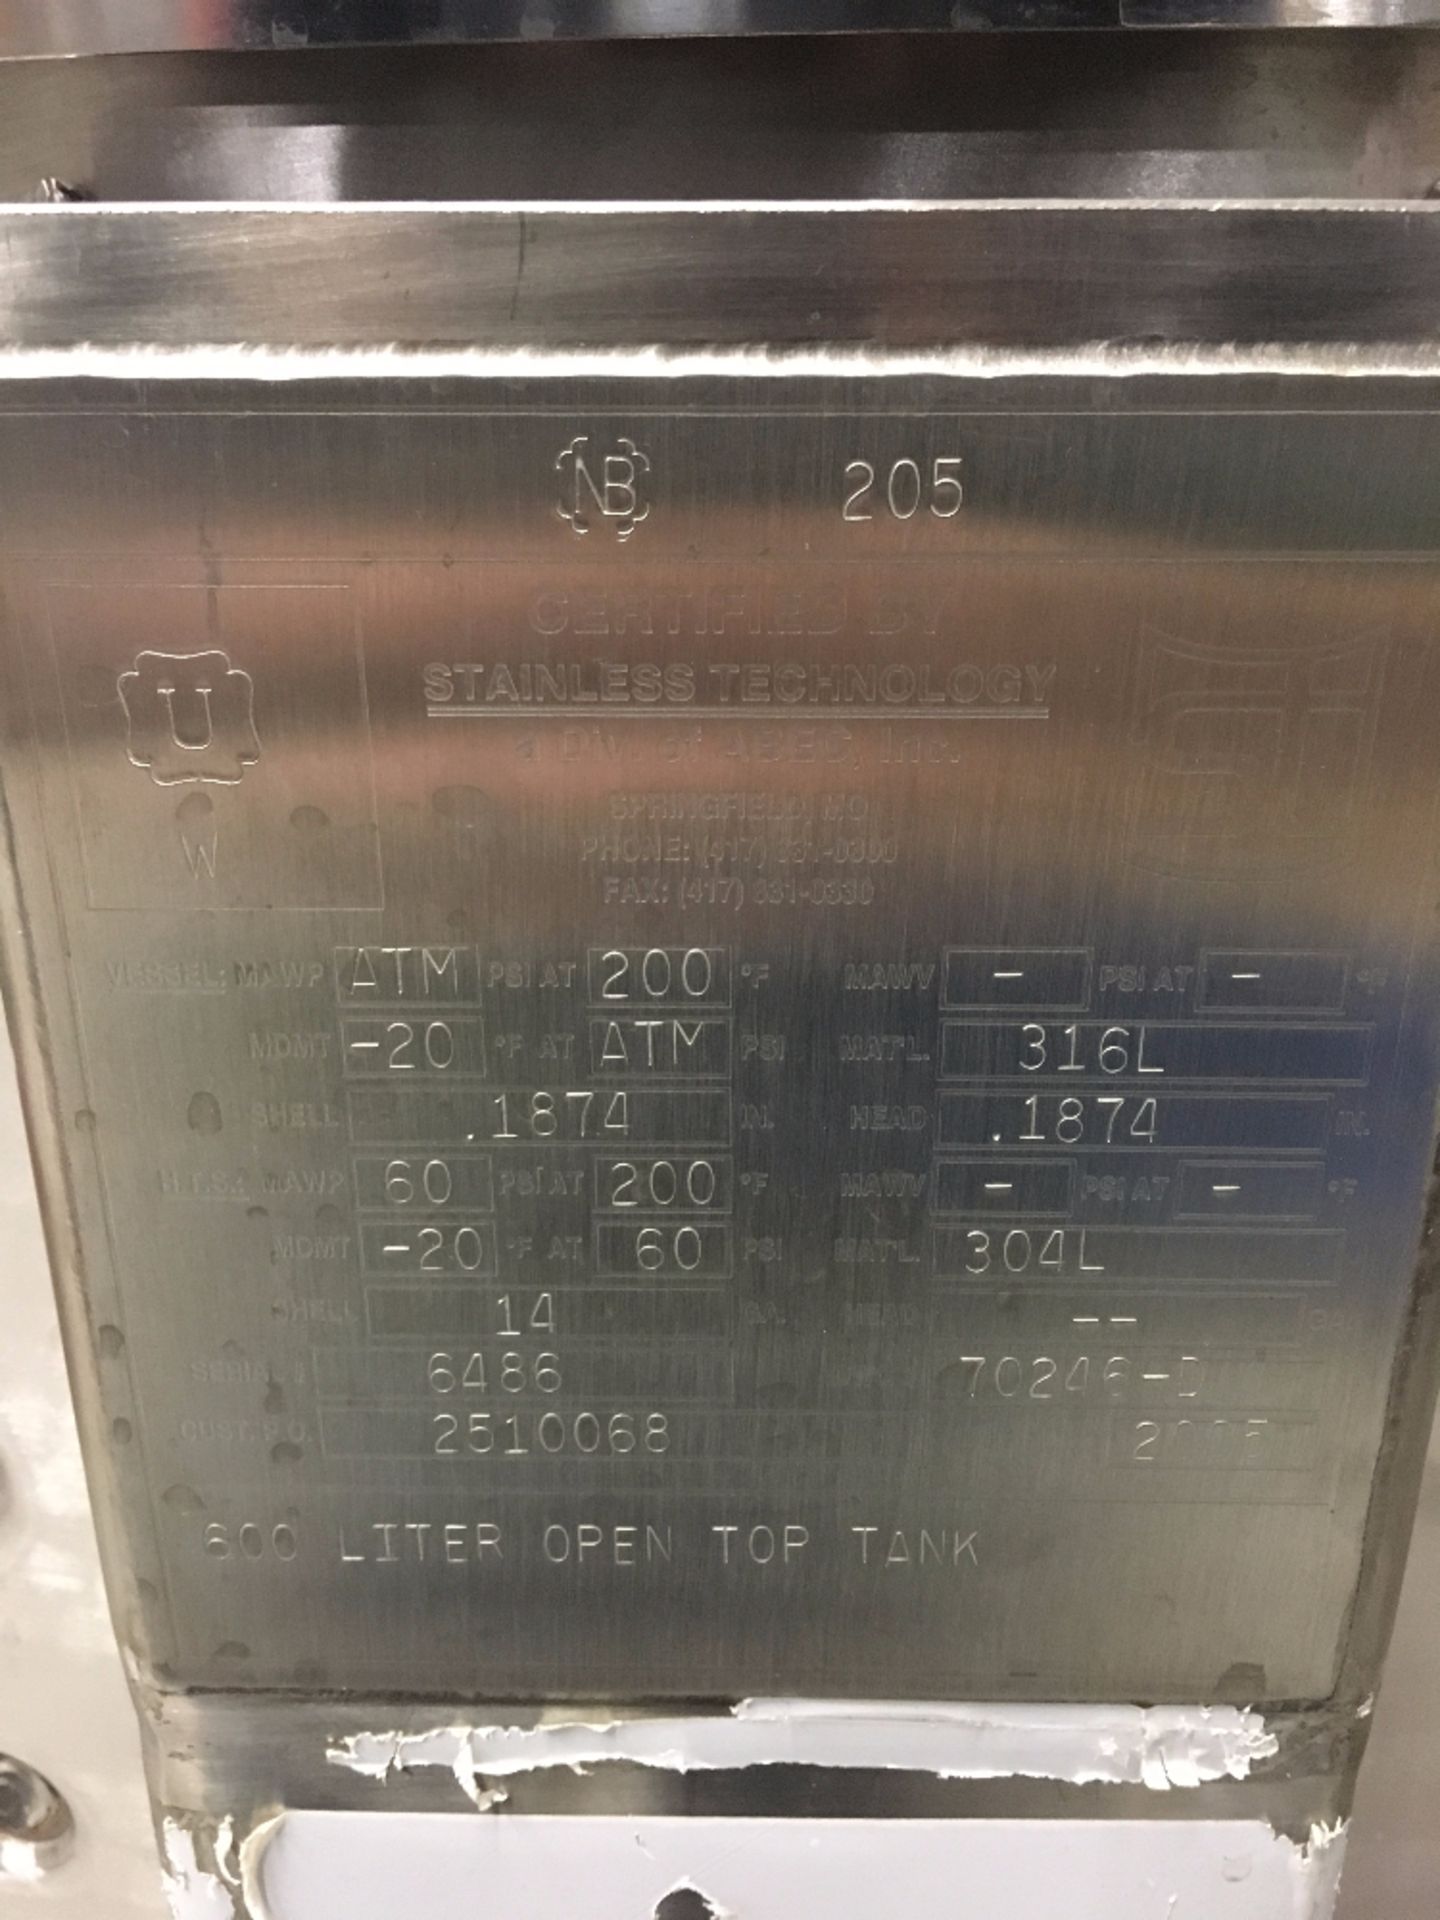 Stainless Technology 300 Liter Tank - Image 2 of 4